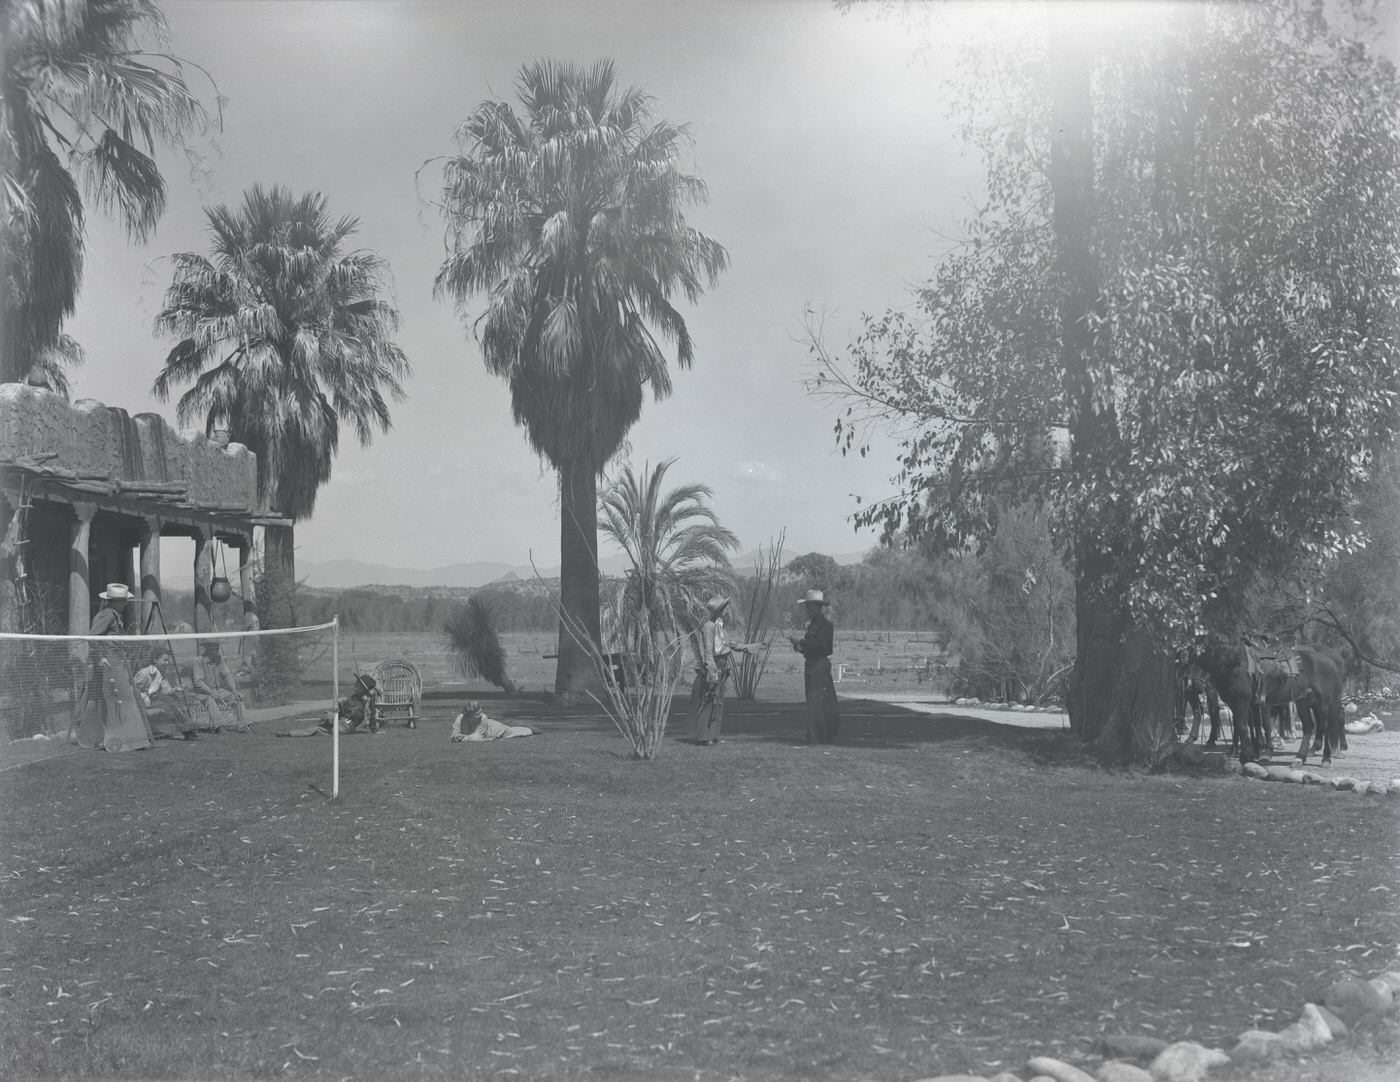 Bar FX Ranch Guests on Grounds, 1930s